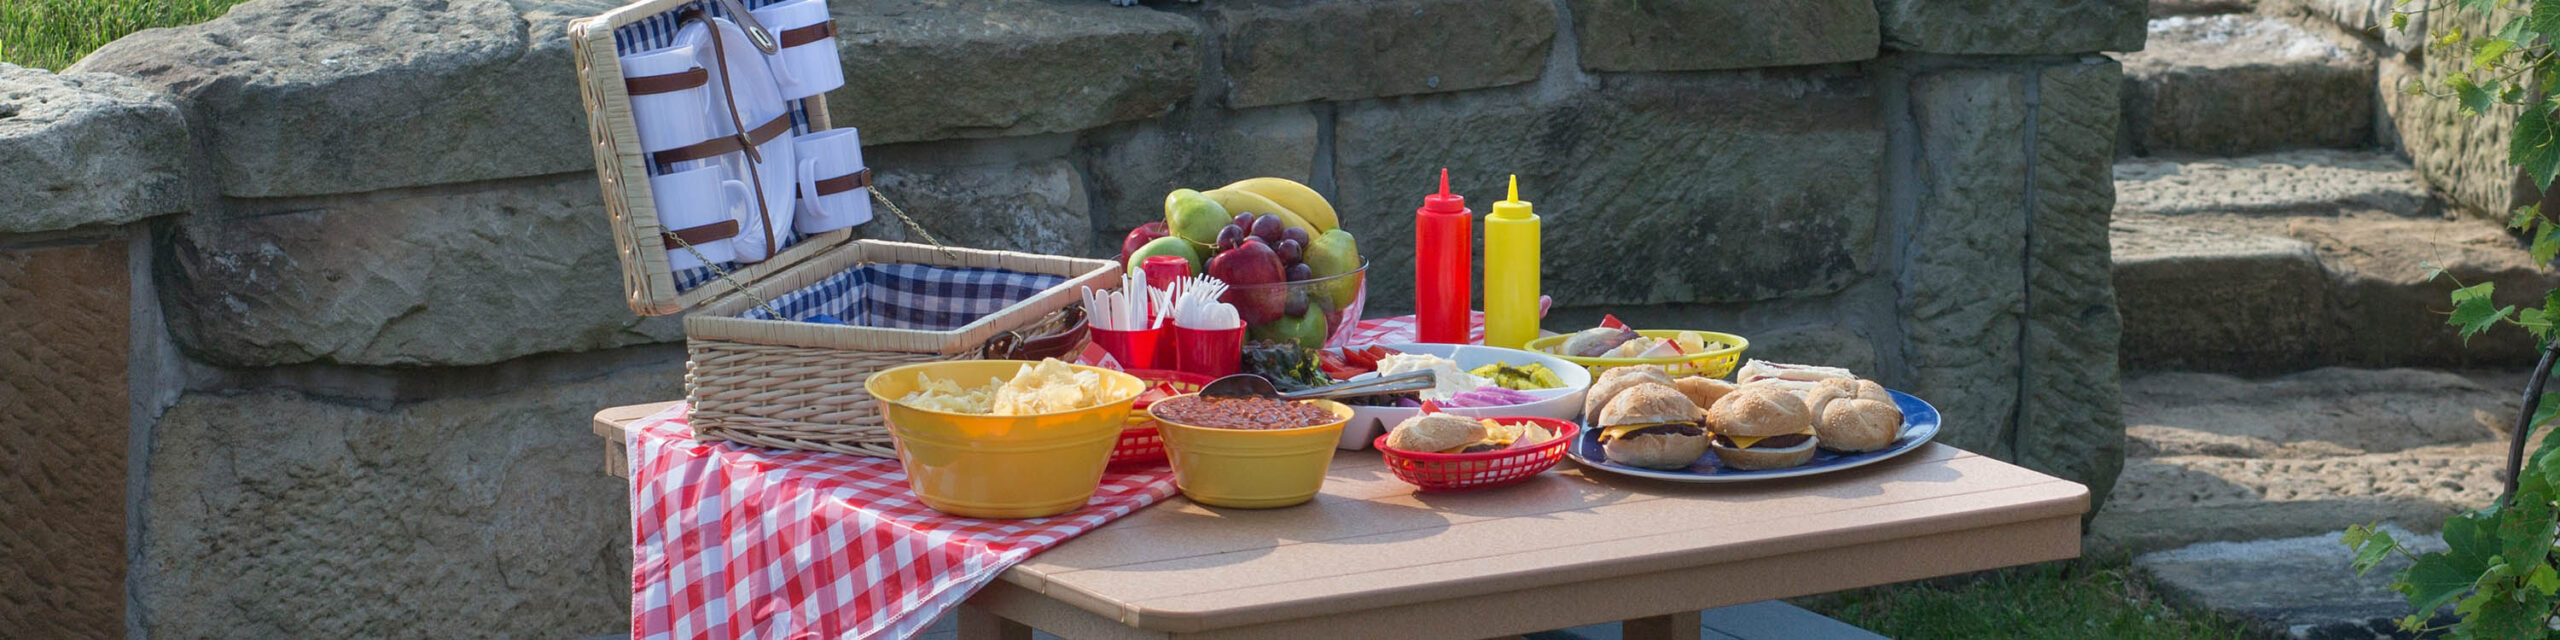 Picnic Basket and Food Items Scattered on Table